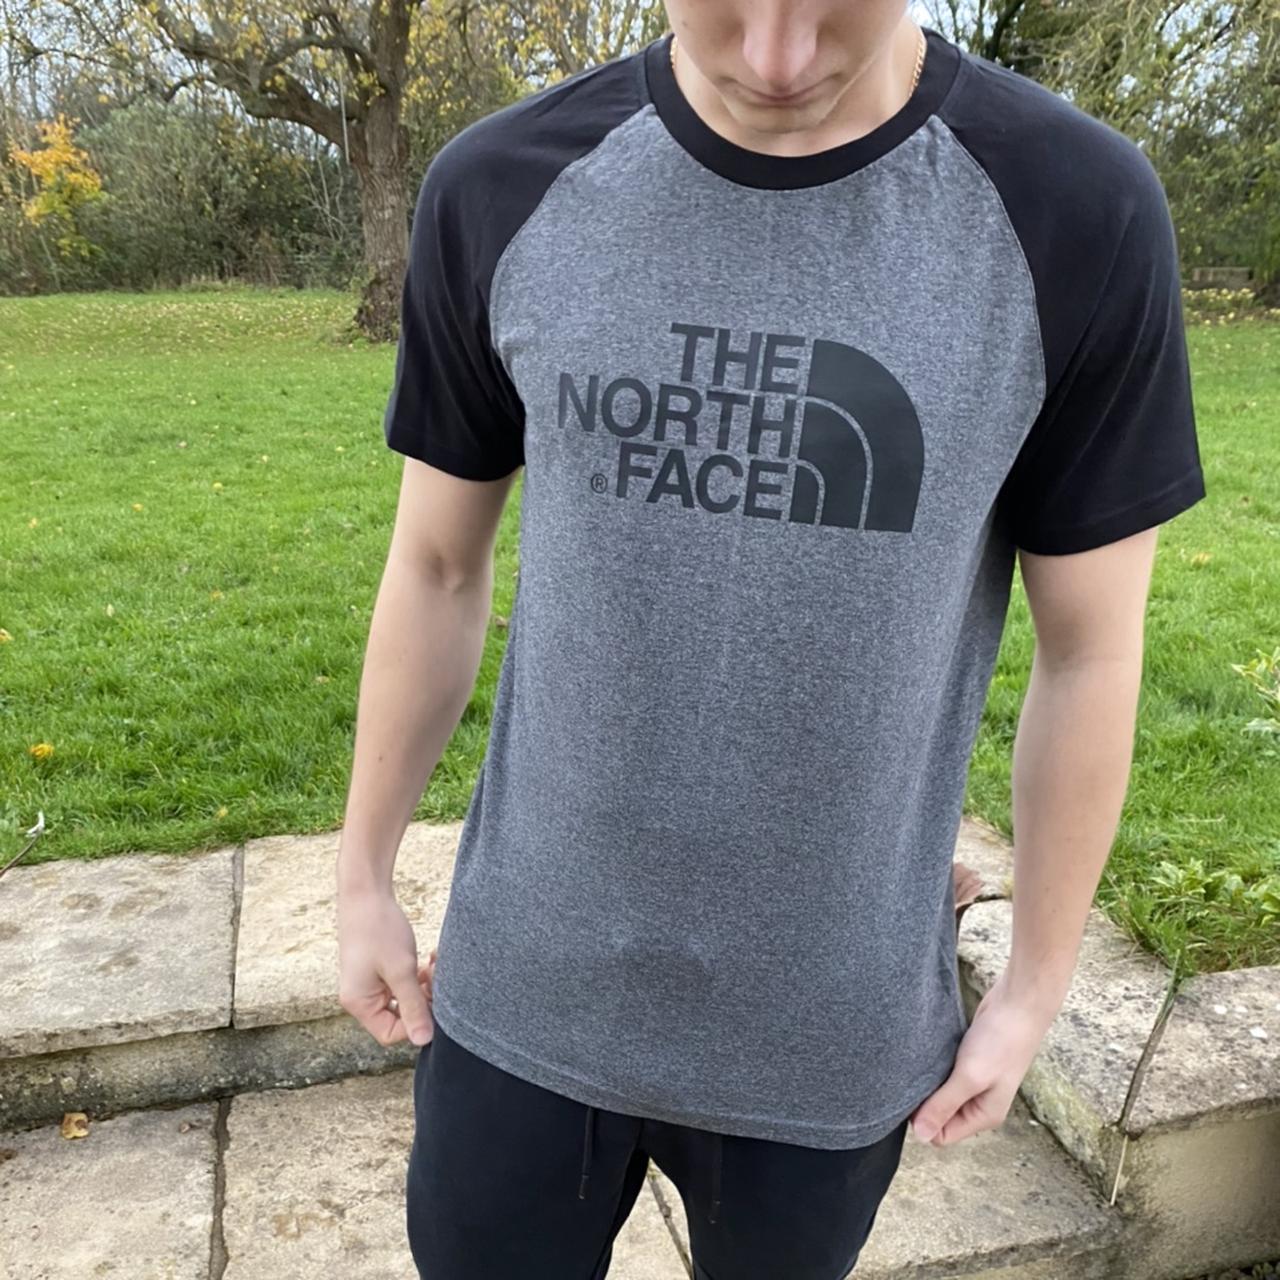 THE NORTH FACE, Men's T-shirt